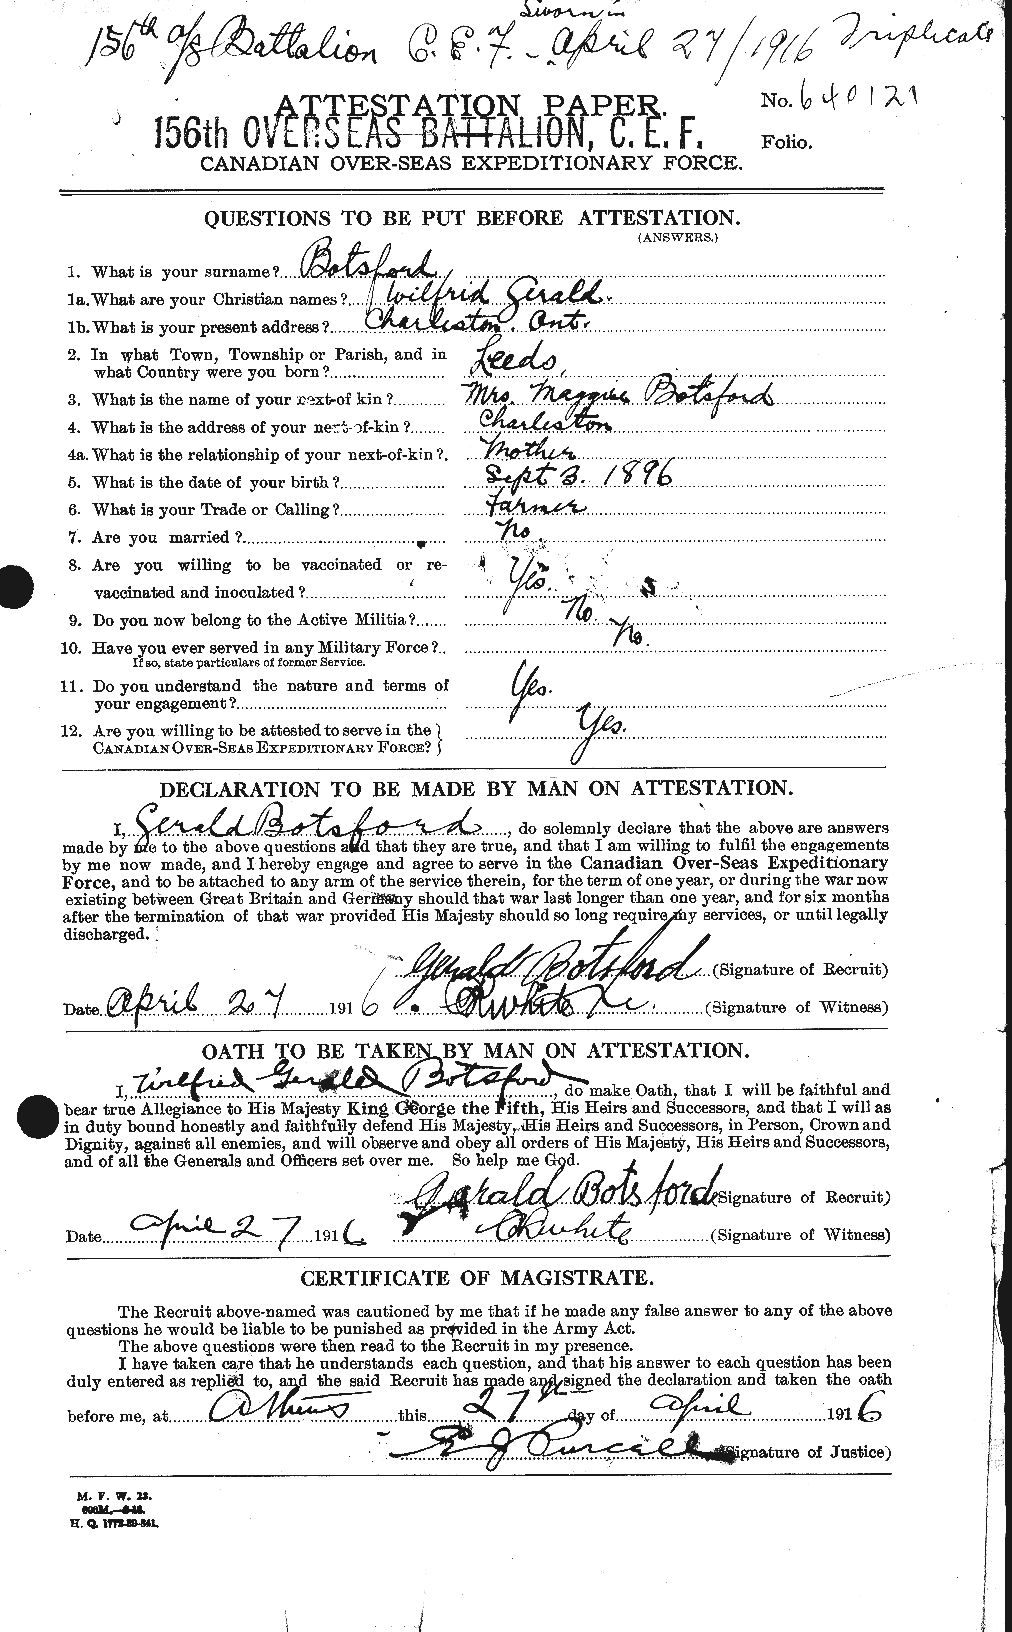 Personnel Records of the First World War - CEF 252039a